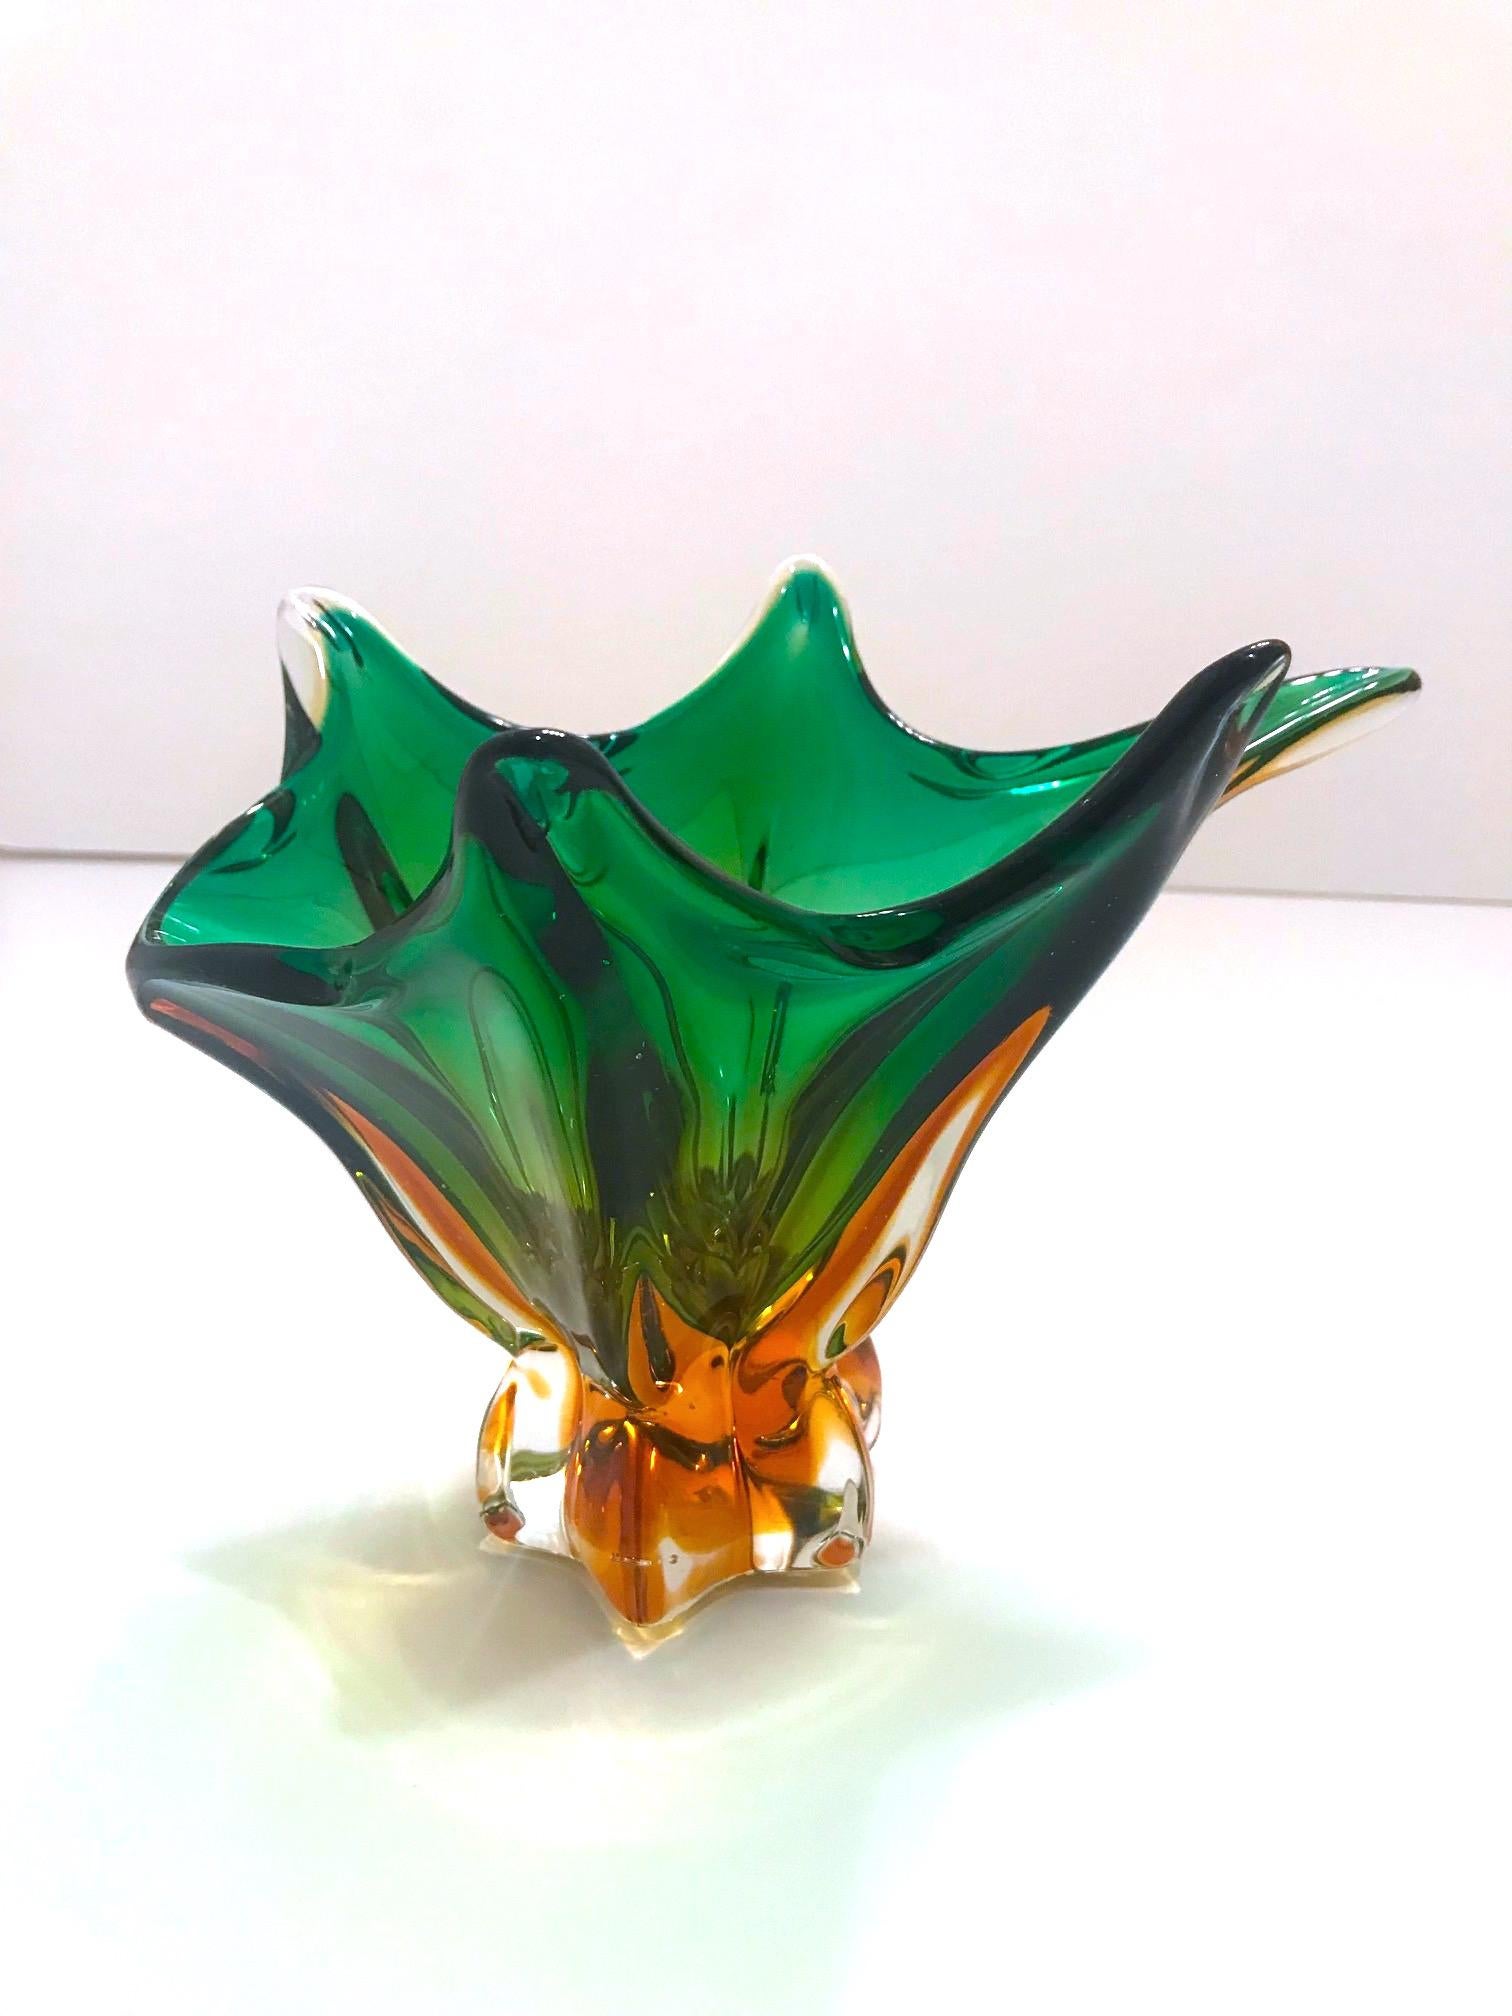 Mid-20th Century 1950s Abstract Murano Sommerso Vase in Emerald and Amber Hues, Italy